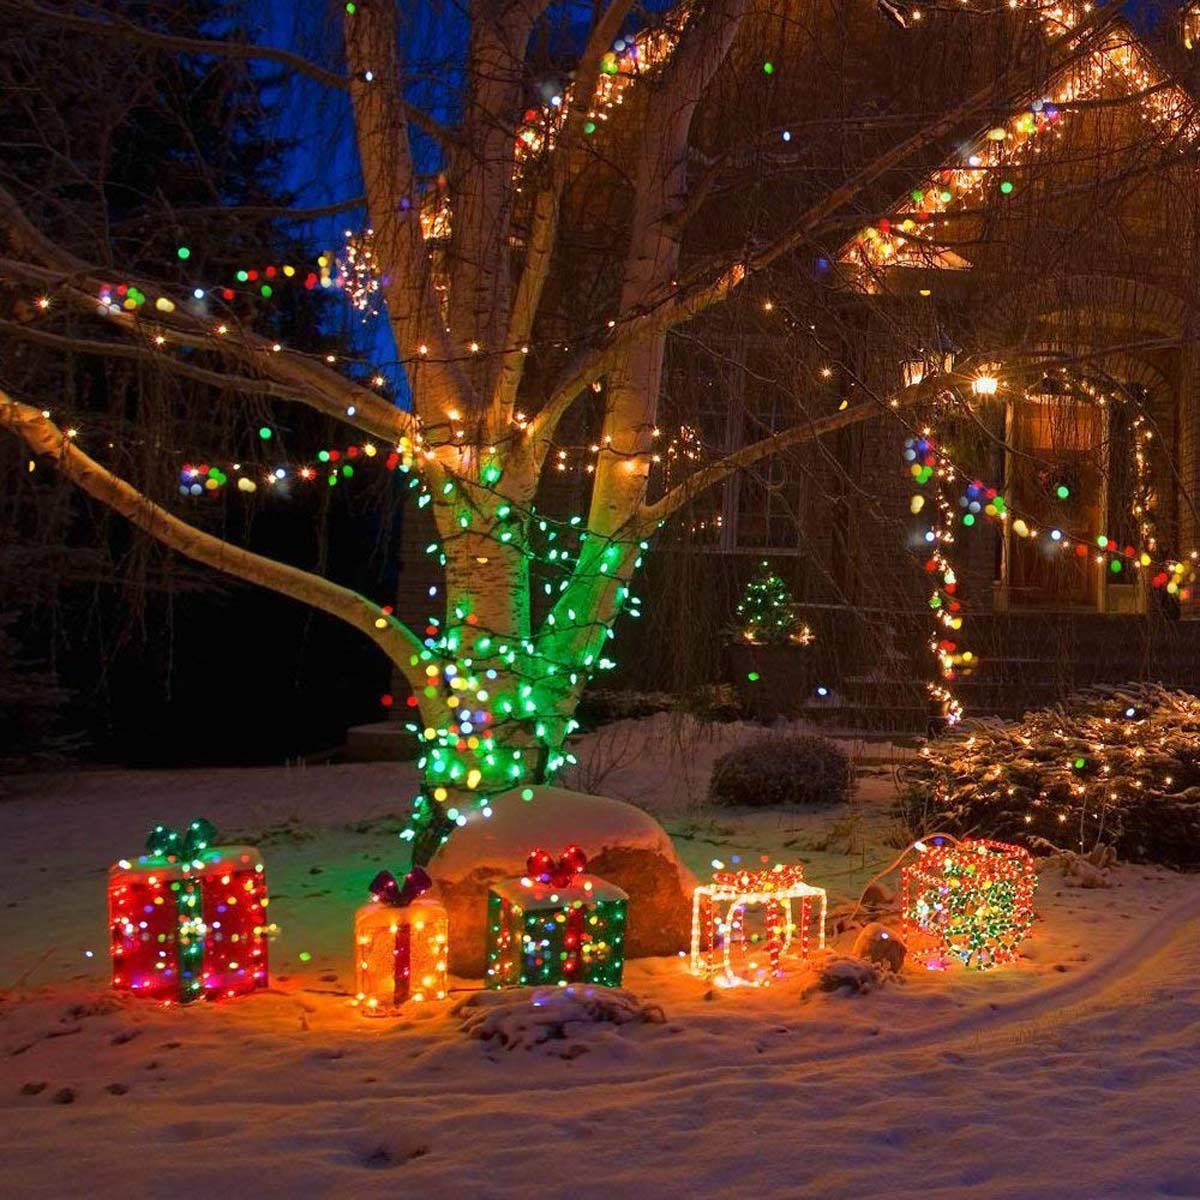 13 Outdoor Christmas Lights Ideas and Tips